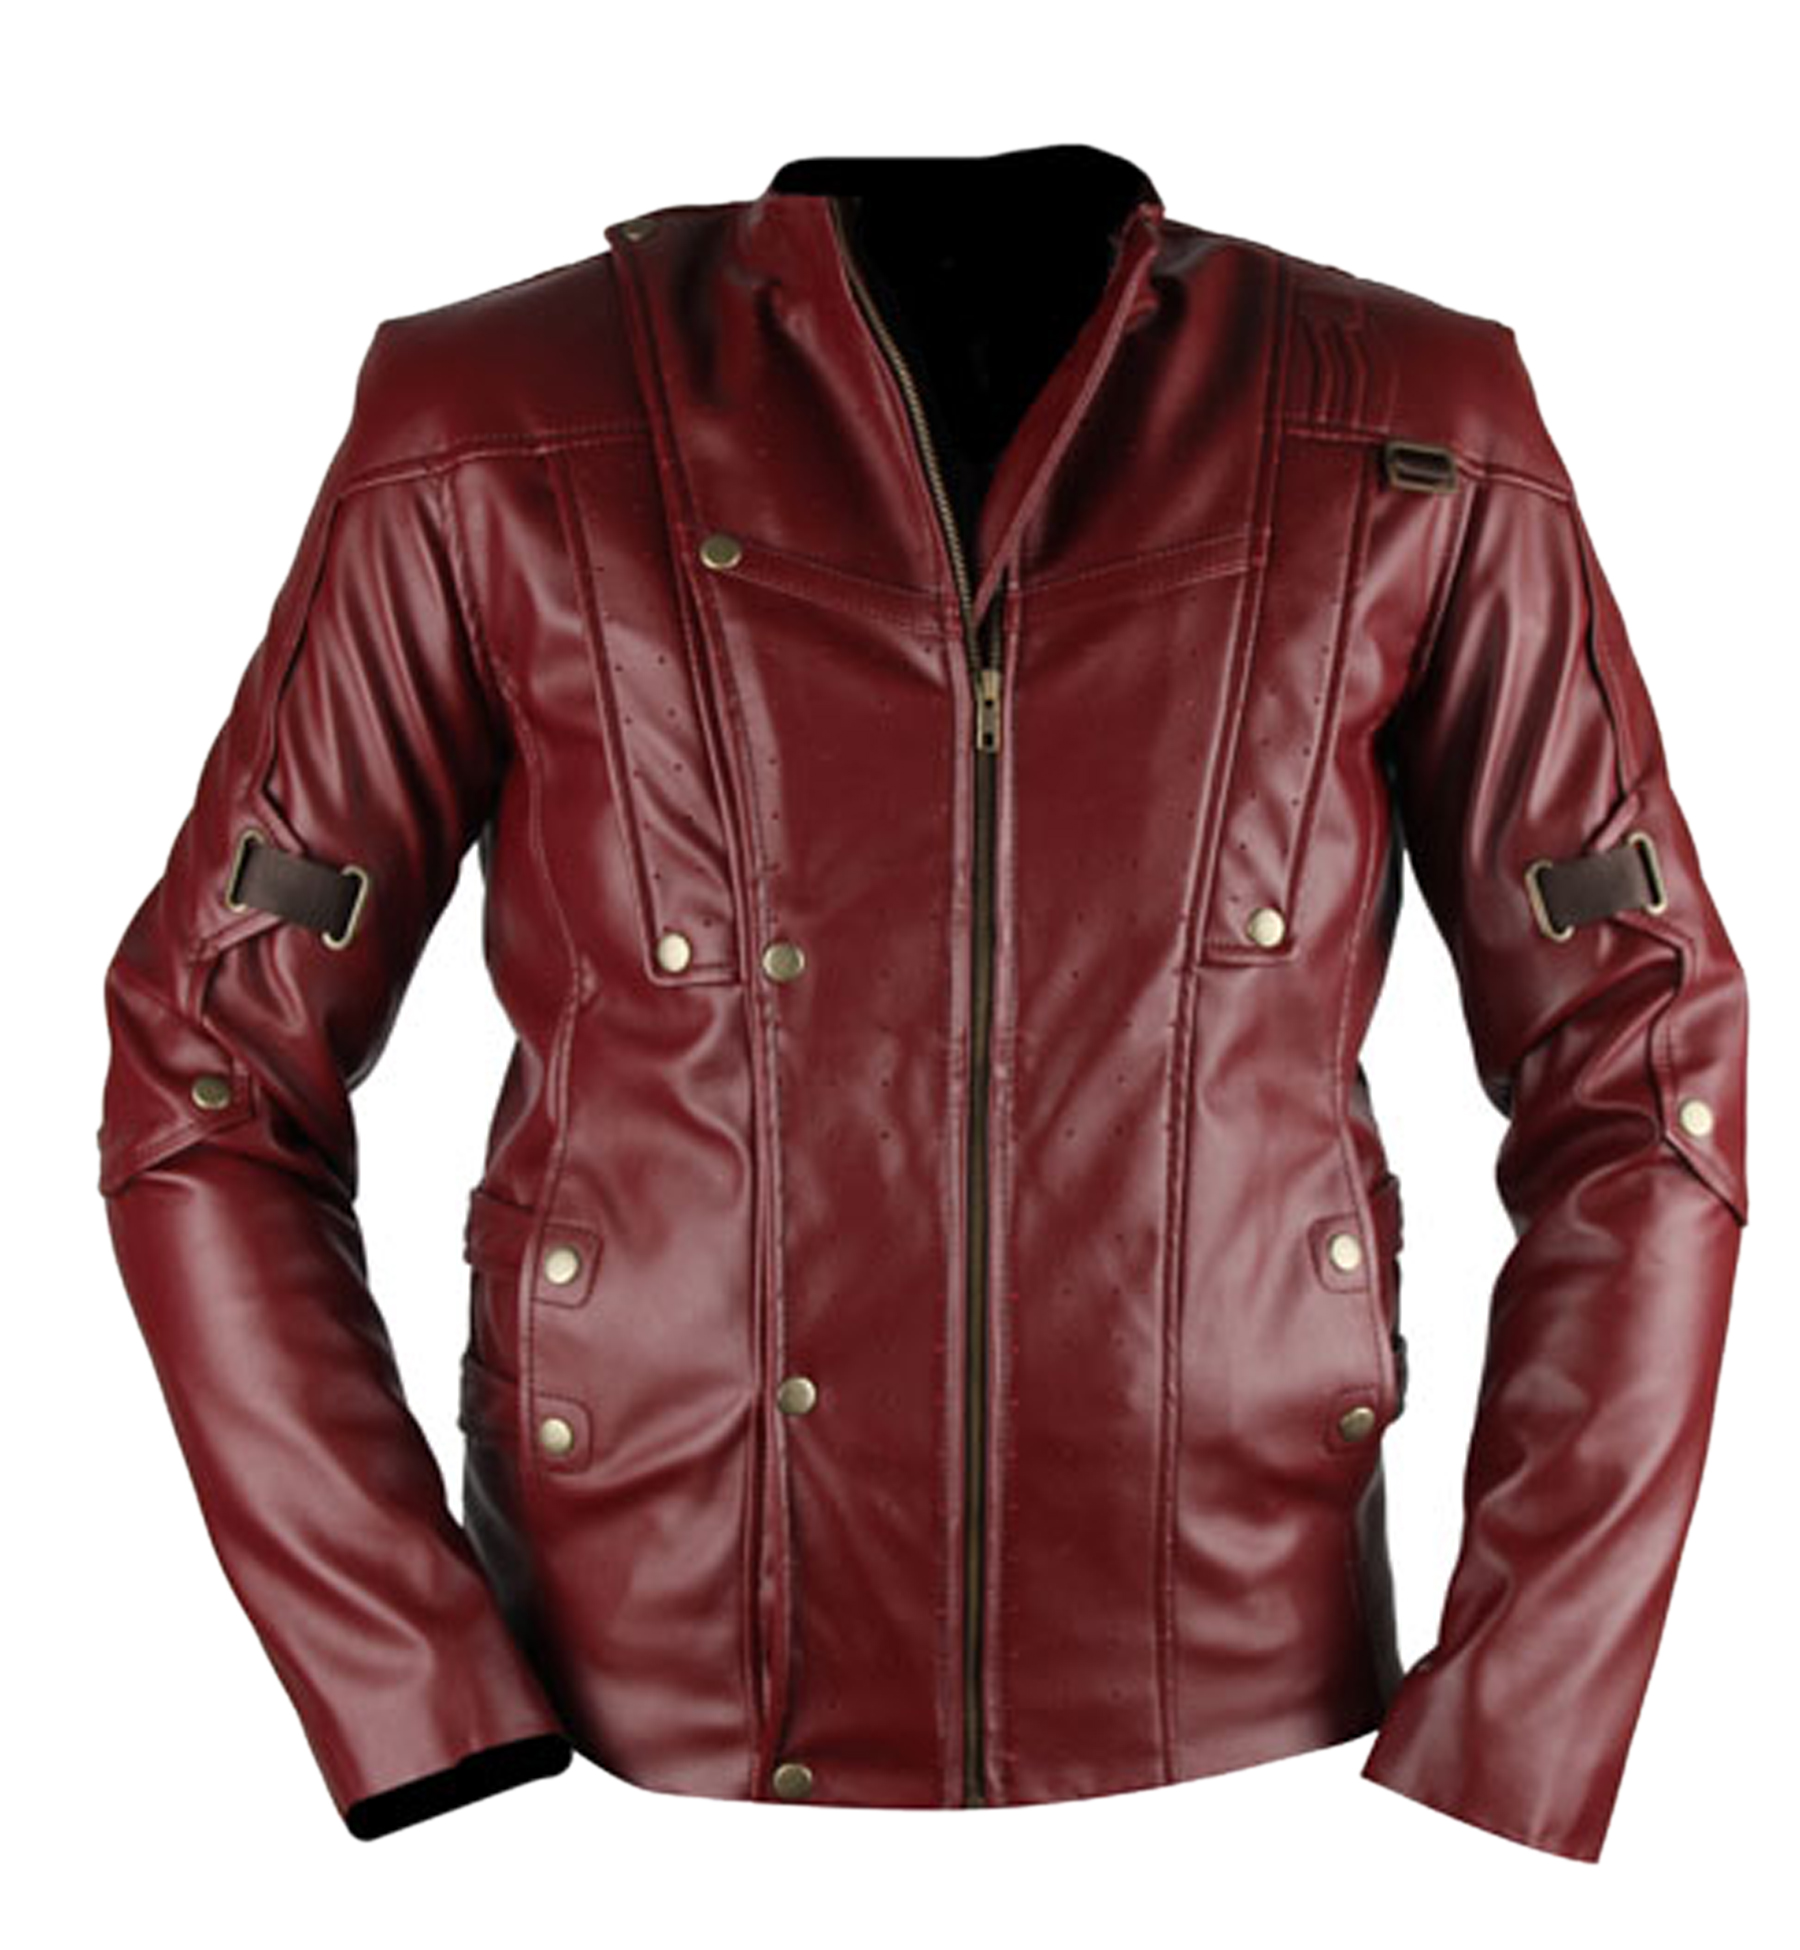 New-Star-Lord-Guardians-Of-The-Galaxy-Leather-Jacket-1-1